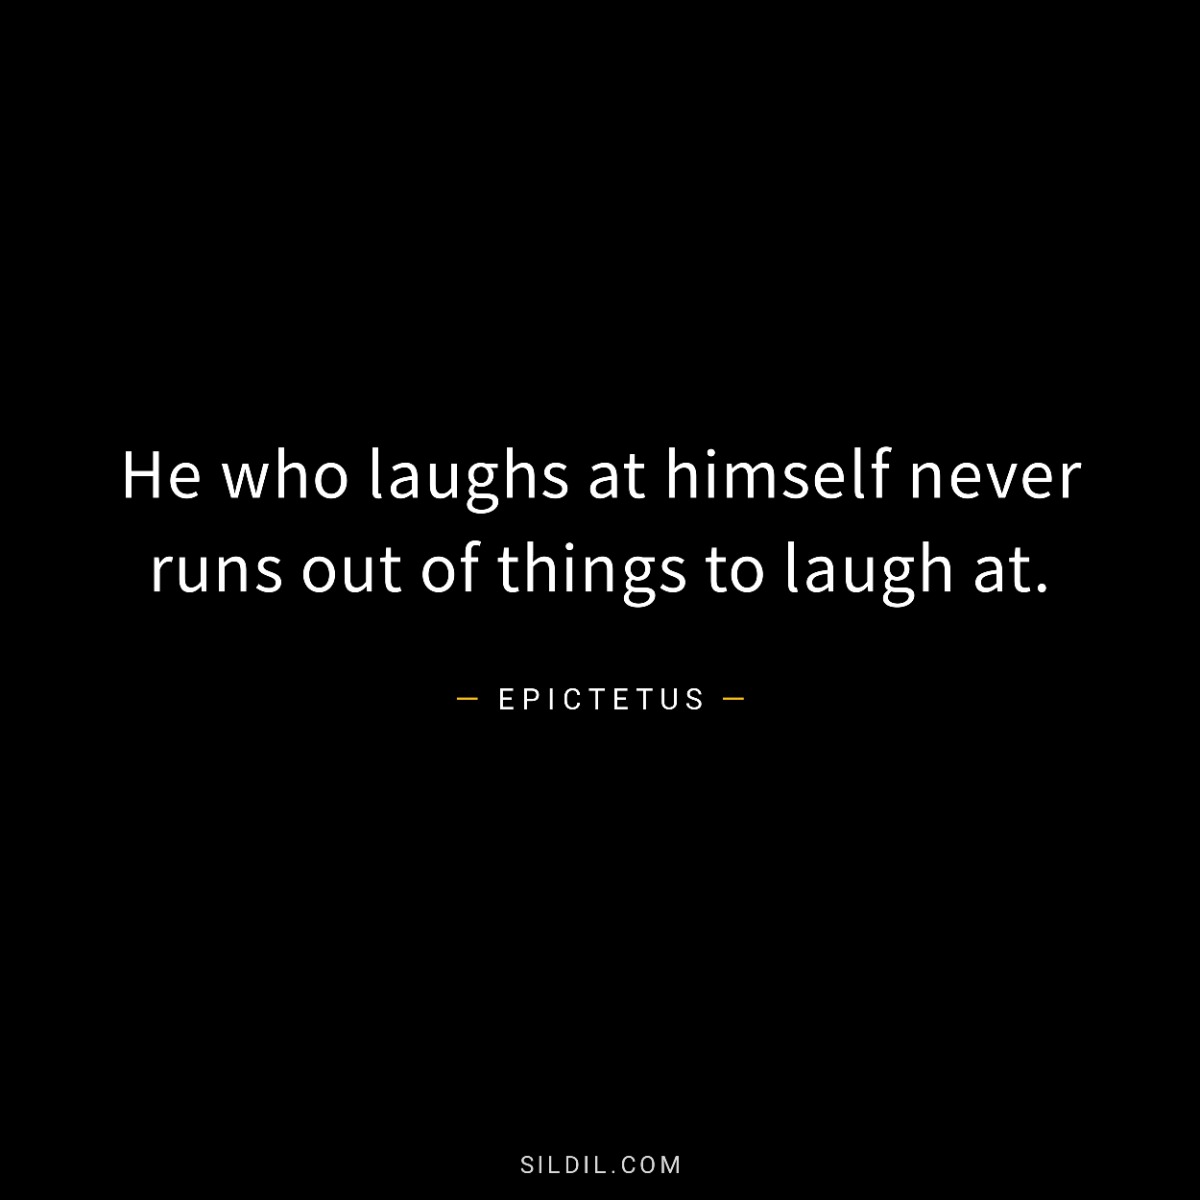 He who laughs at himself never runs out of things to laugh at.